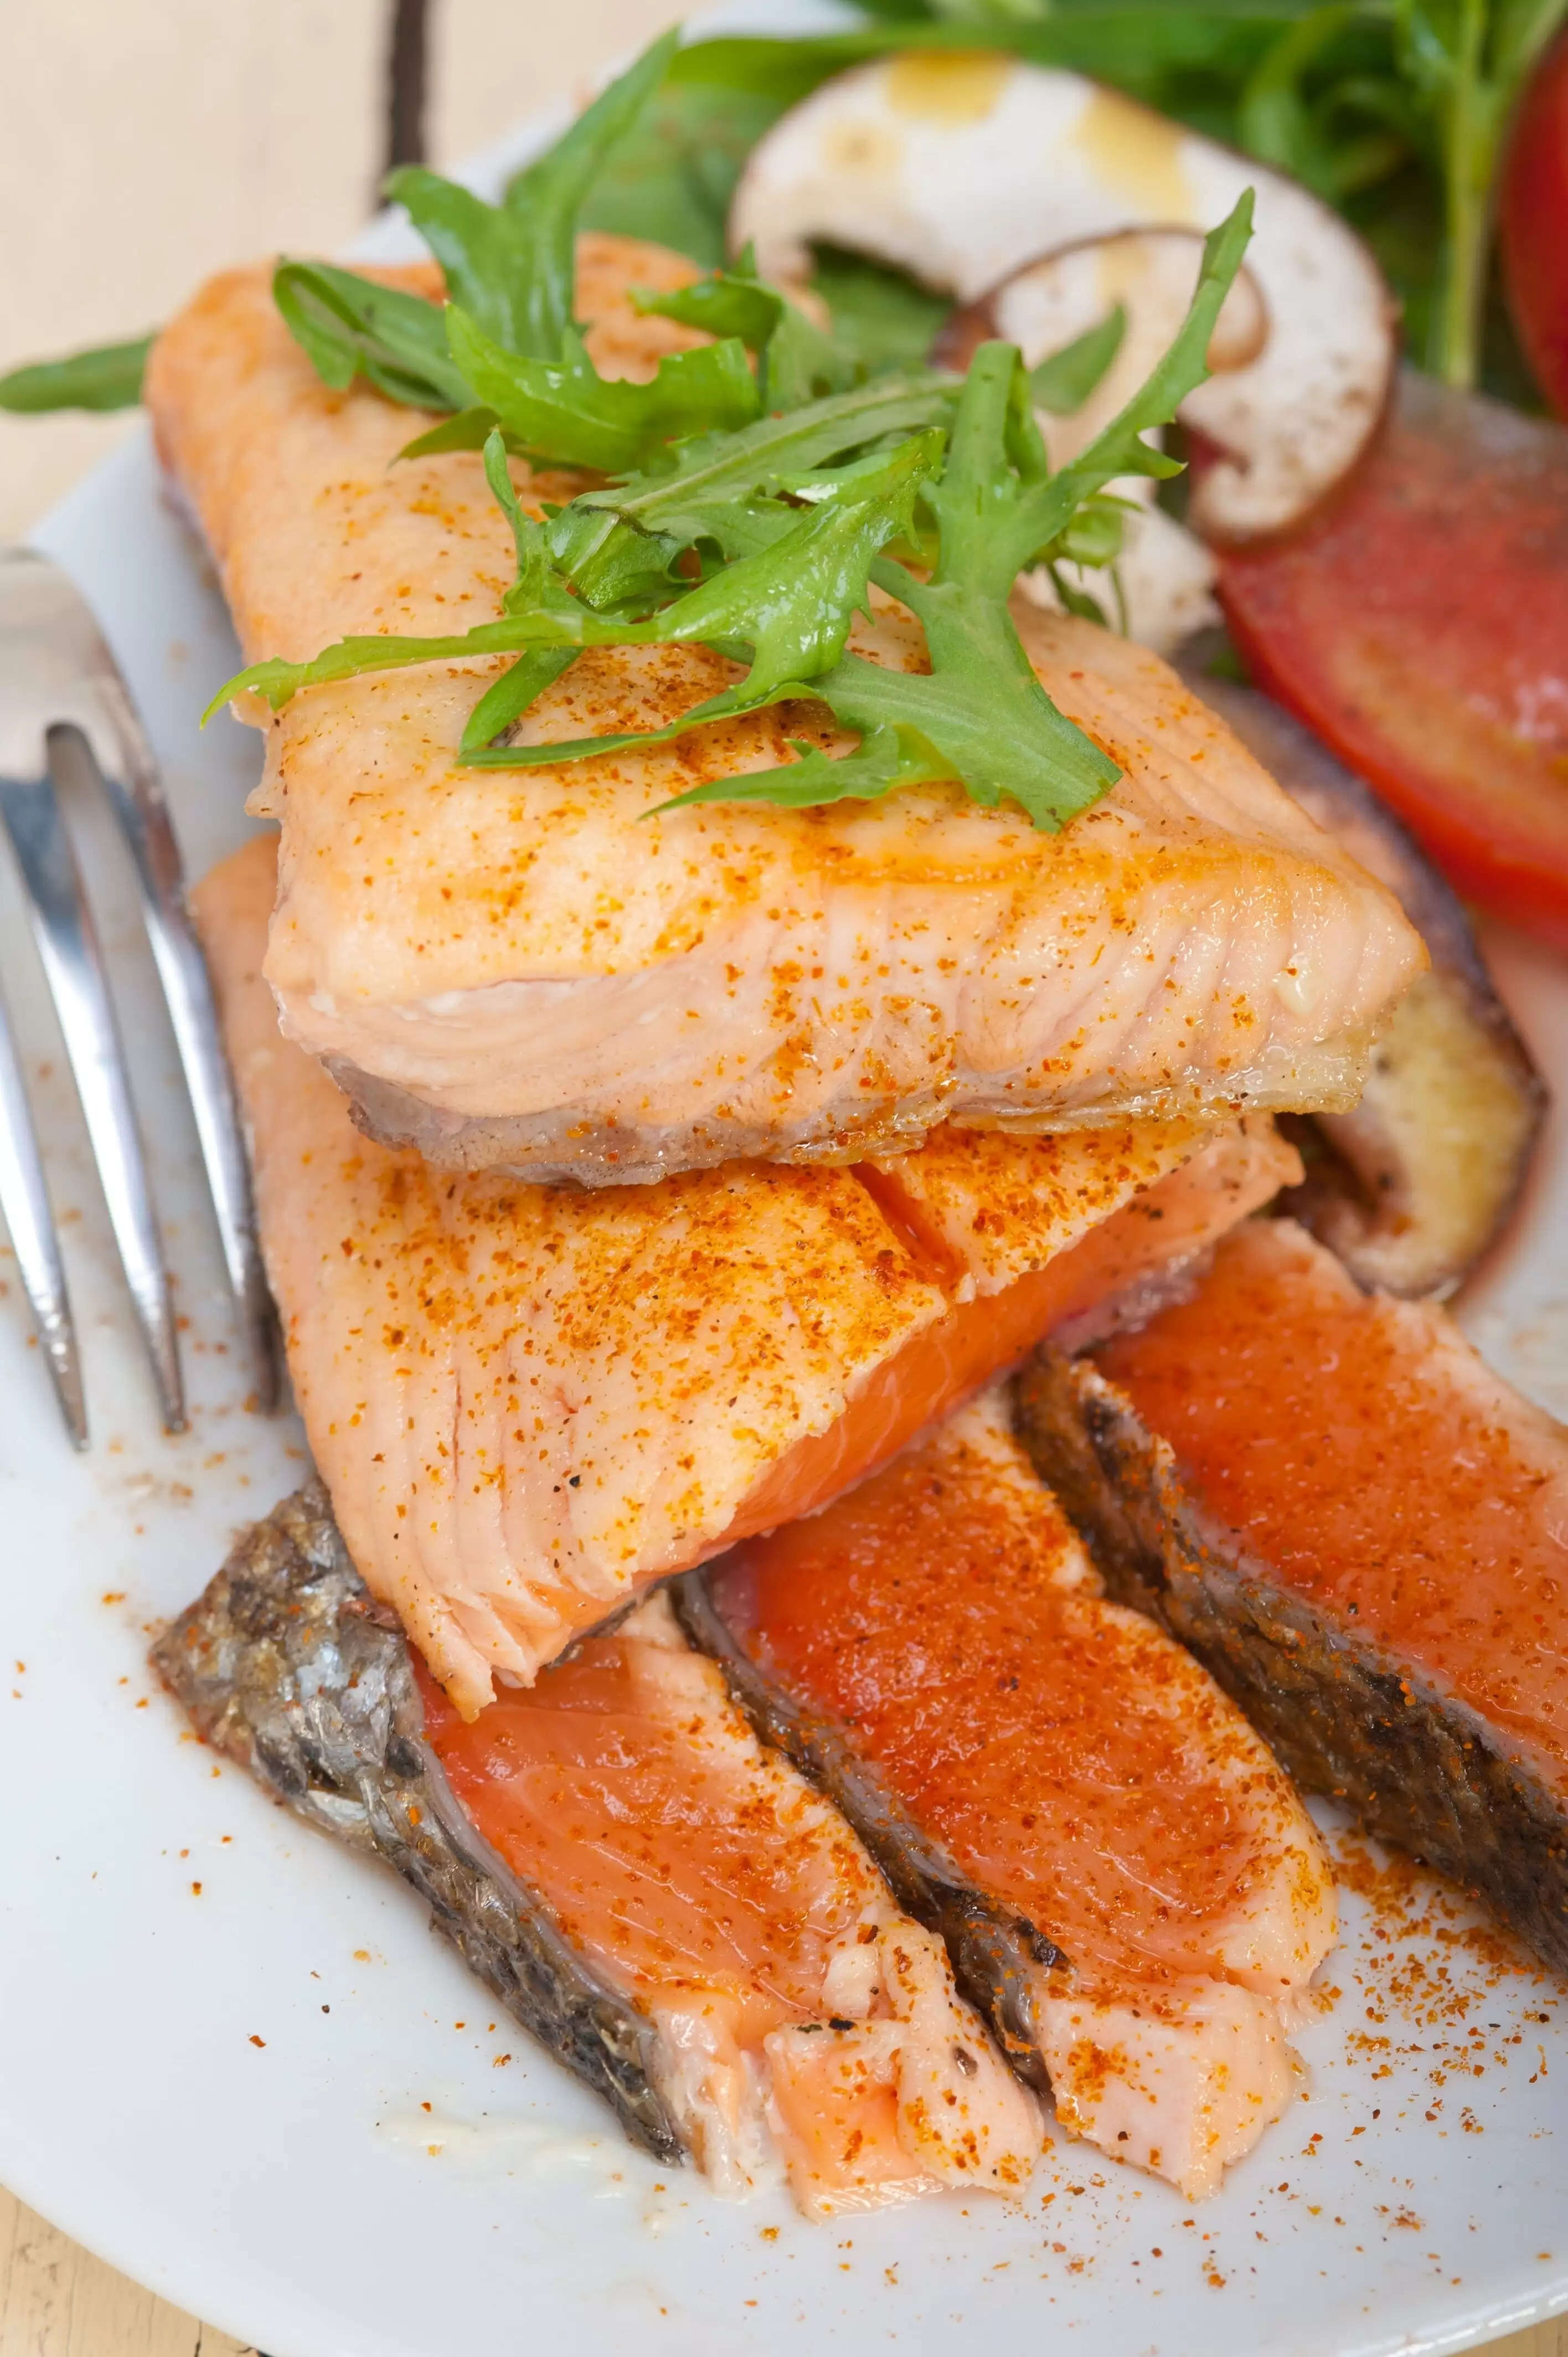 Omega 3 fatty acids: Add these foods to your diet 